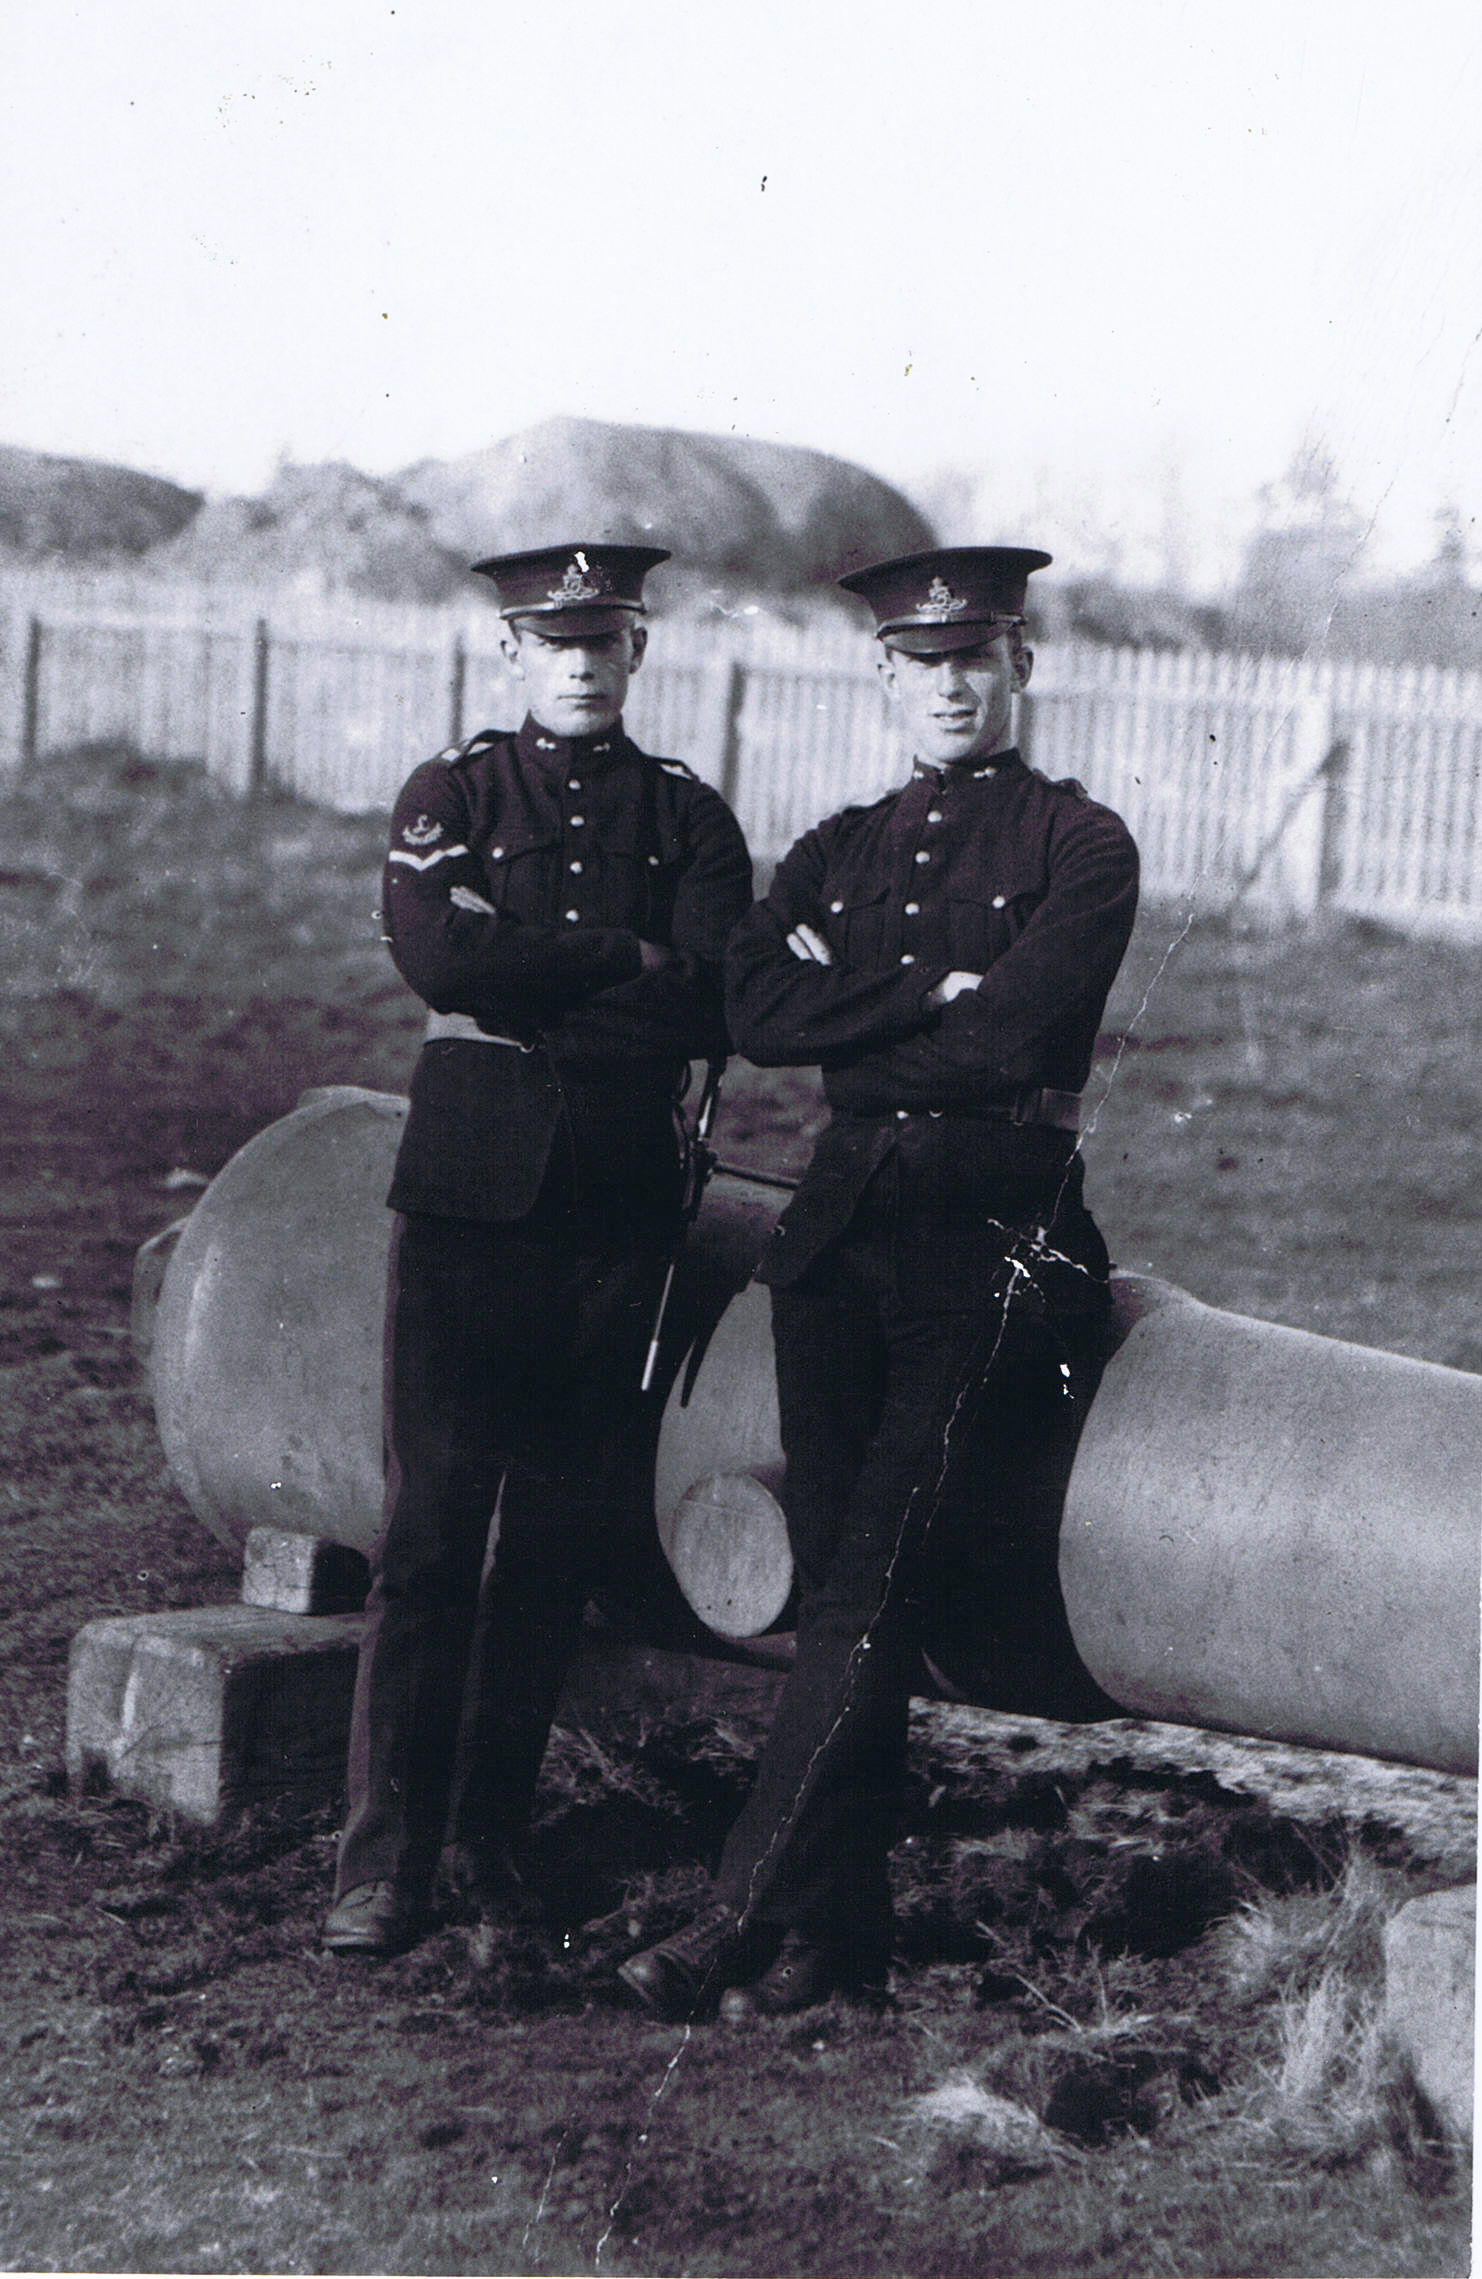 Gunners of the 5th Regiment